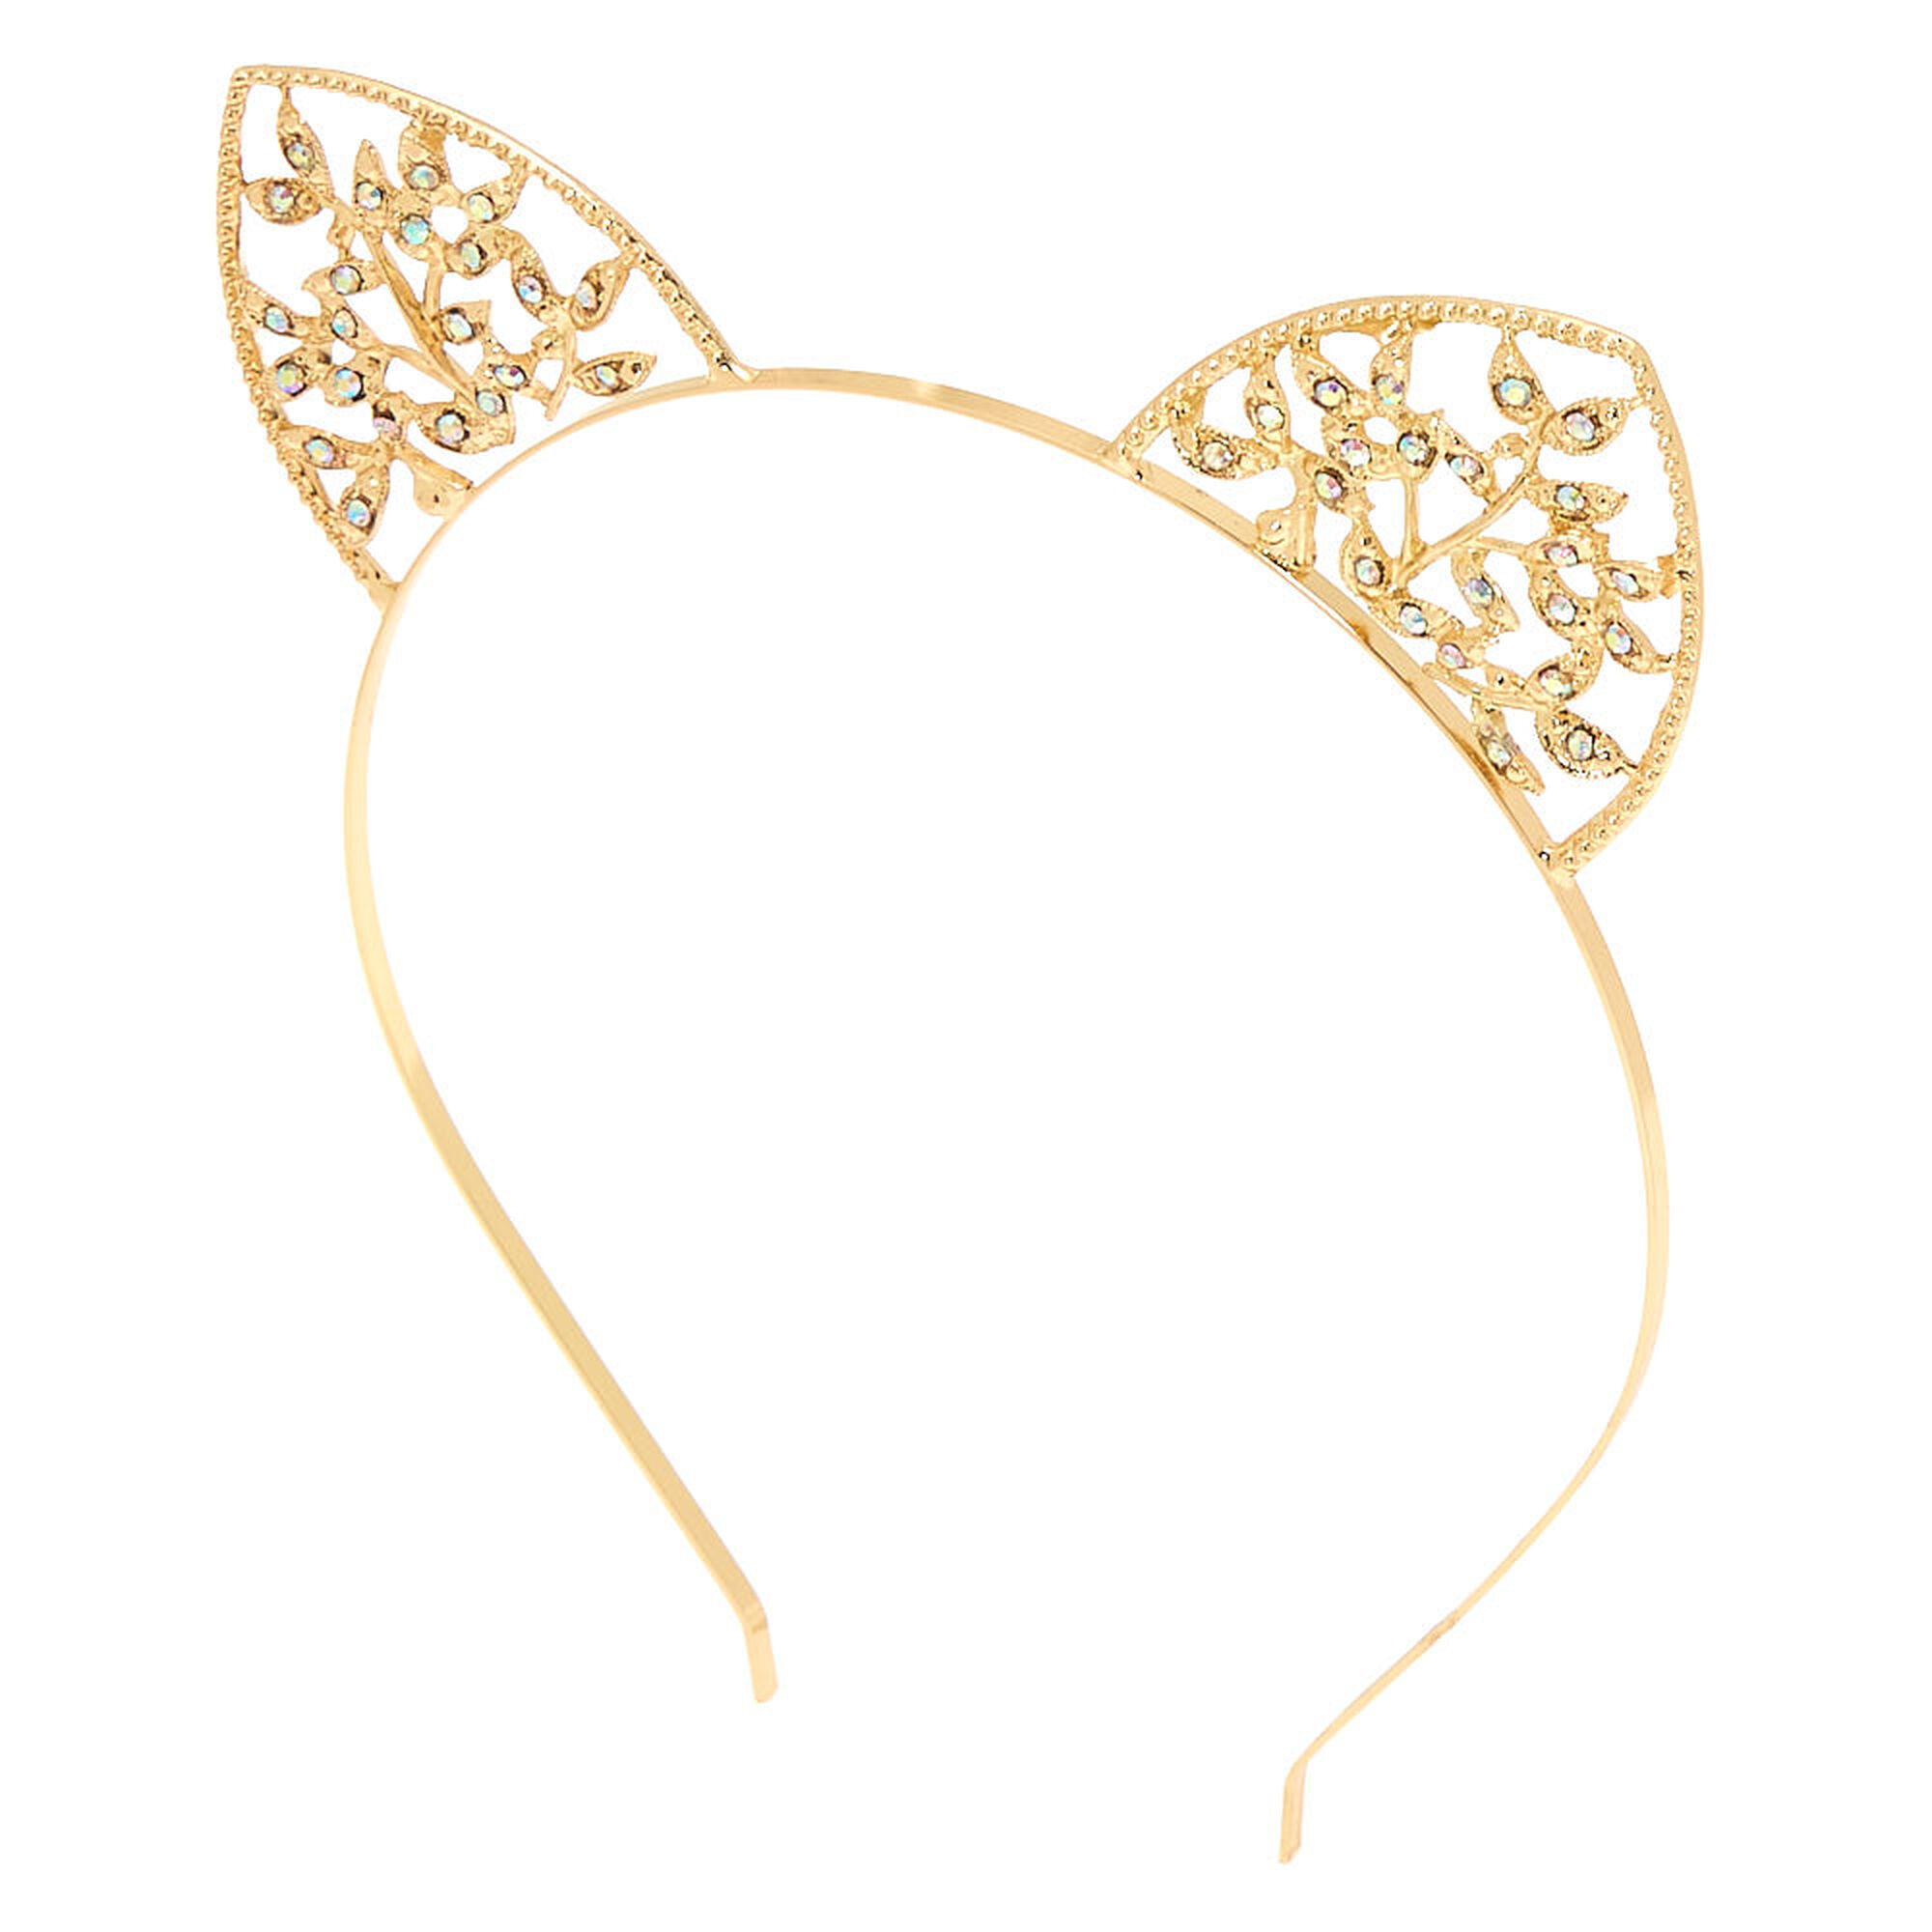 View Claires Ivy Cat Ears Headband Gold information